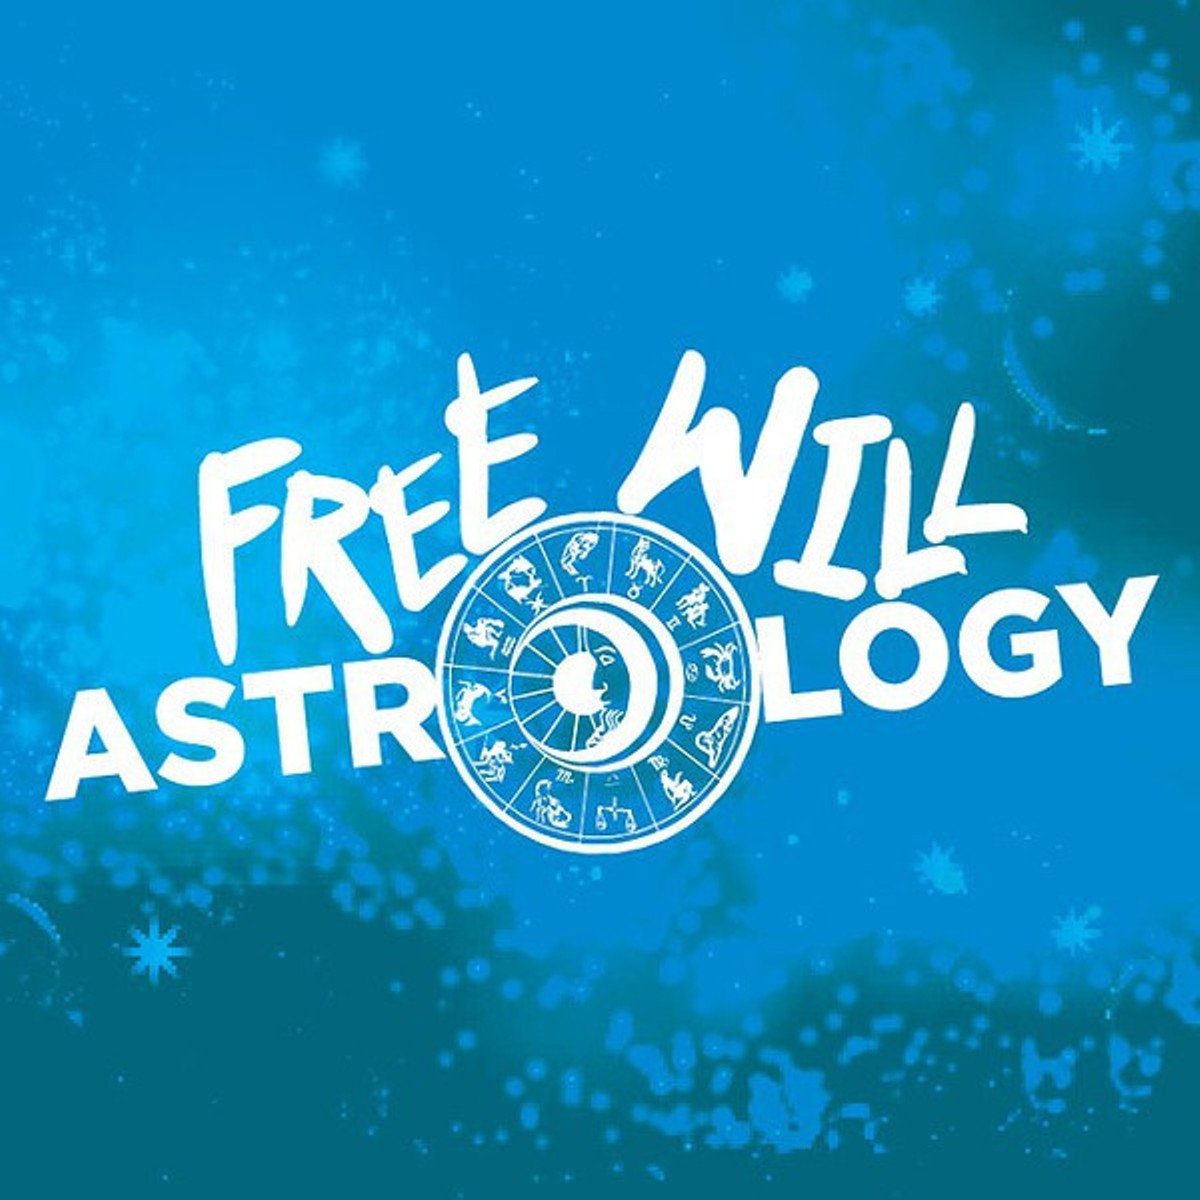 Free Will Astrology (9/30/15)